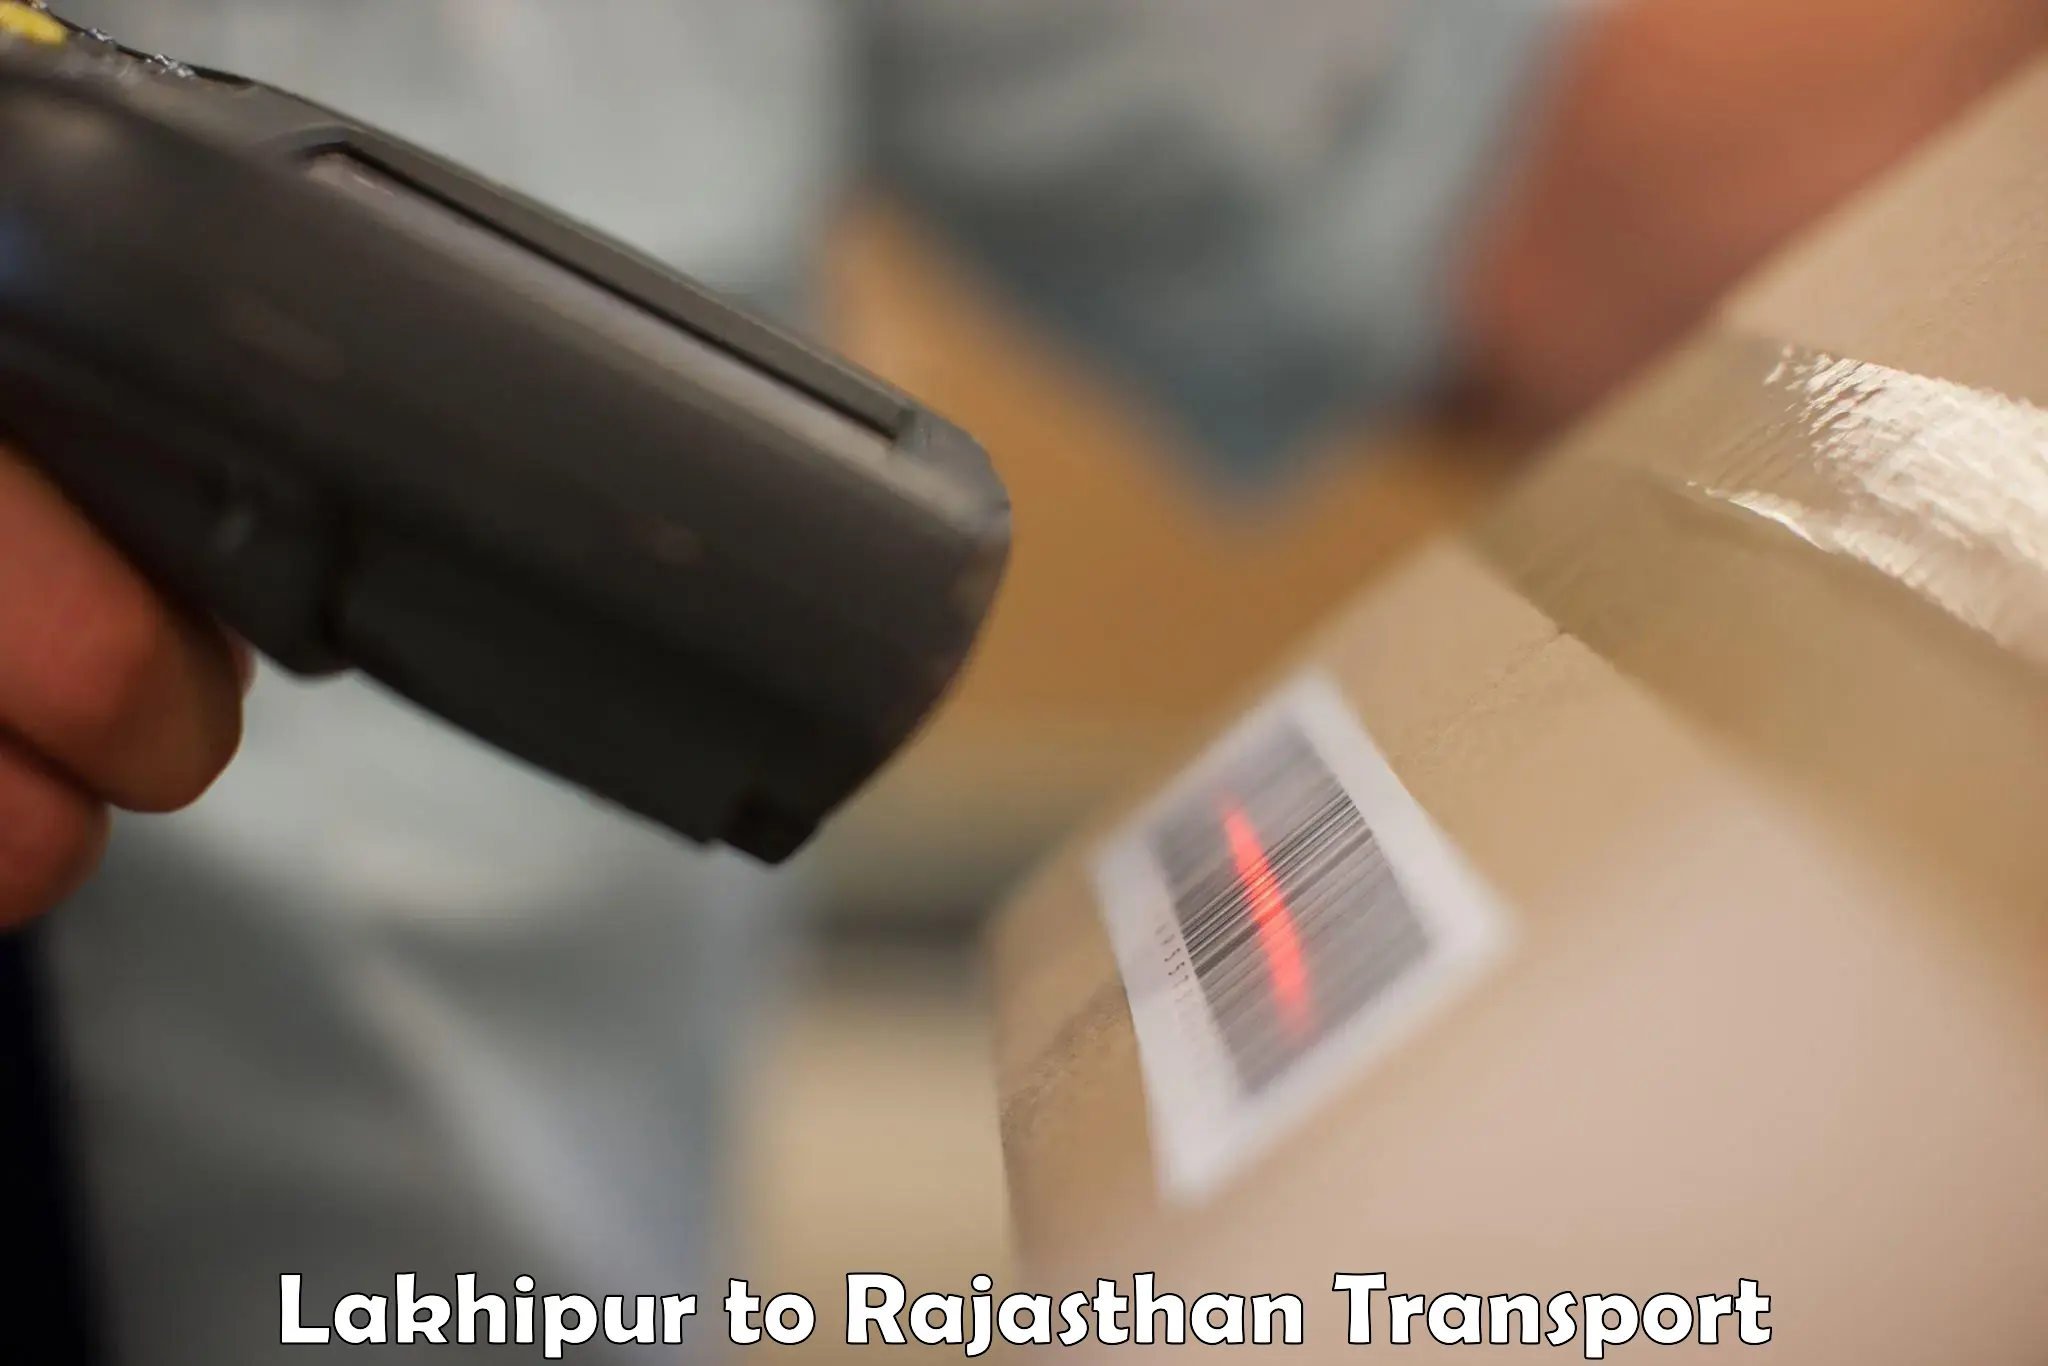 Daily parcel service transport in Lakhipur to Rajgarh Rajasthan